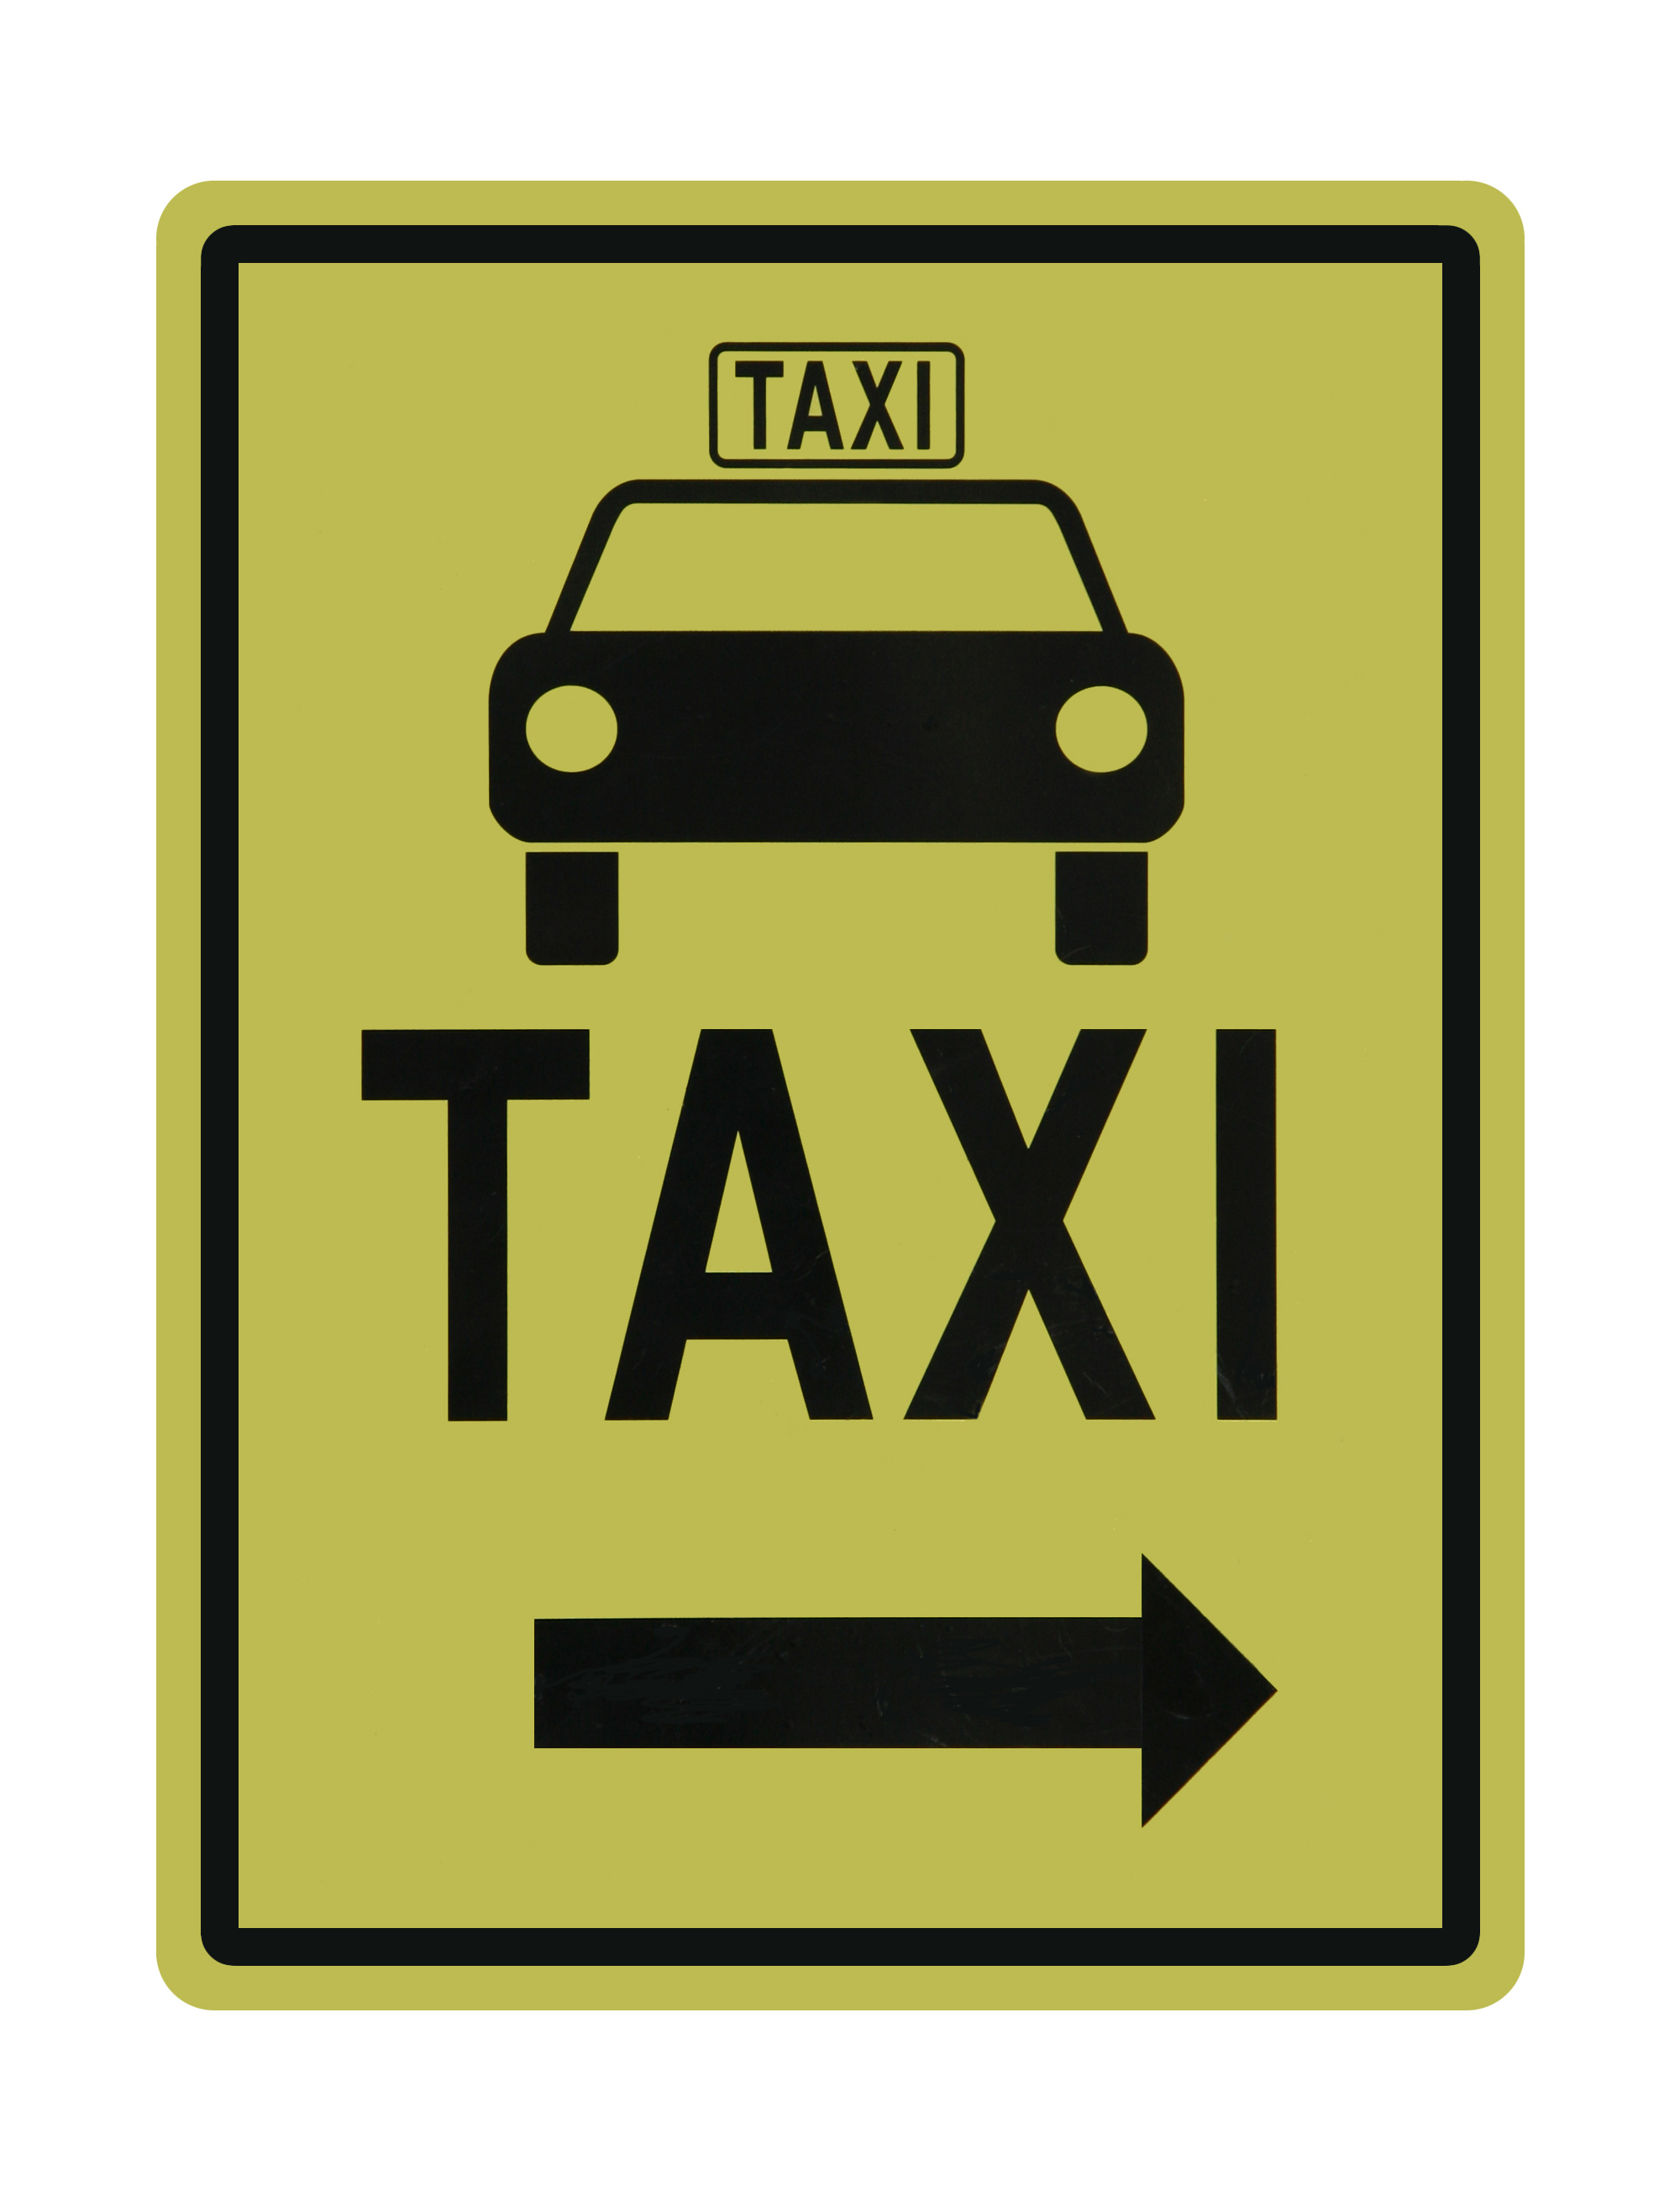 Taxi info sign